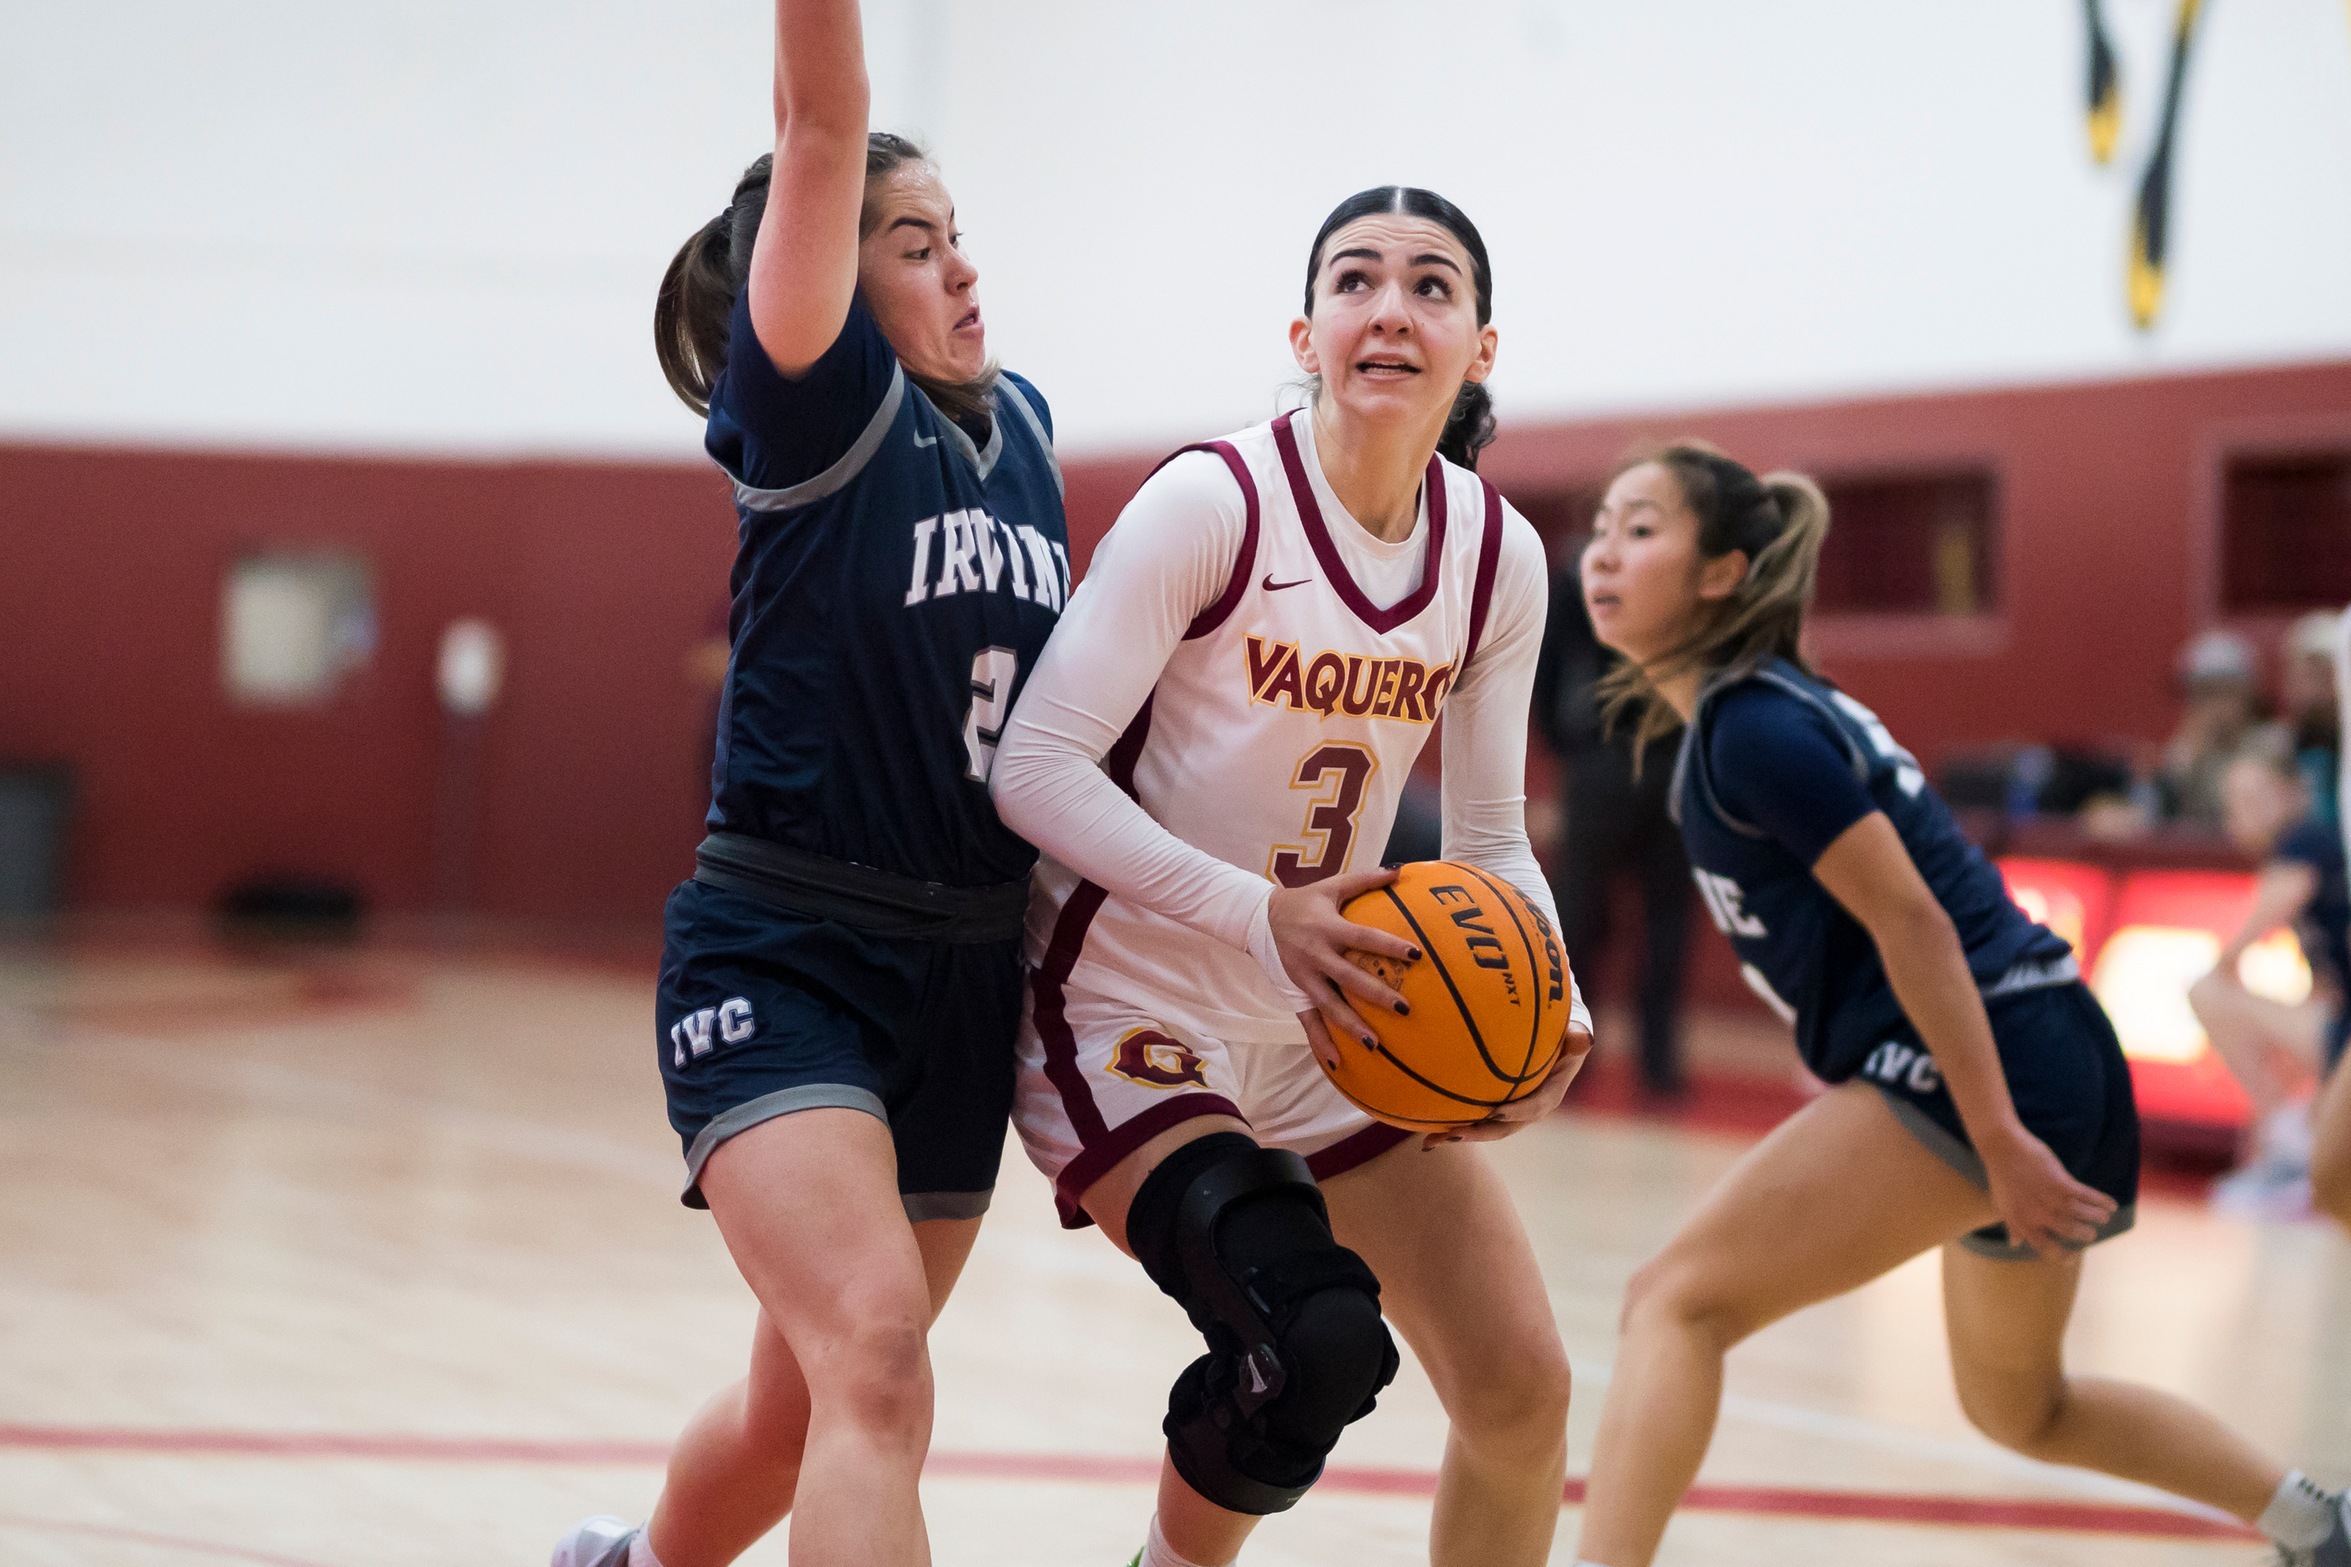 GCC Women's Basketball improves to 6-2 with 54-35 win over Irvine Valley Dec. 8